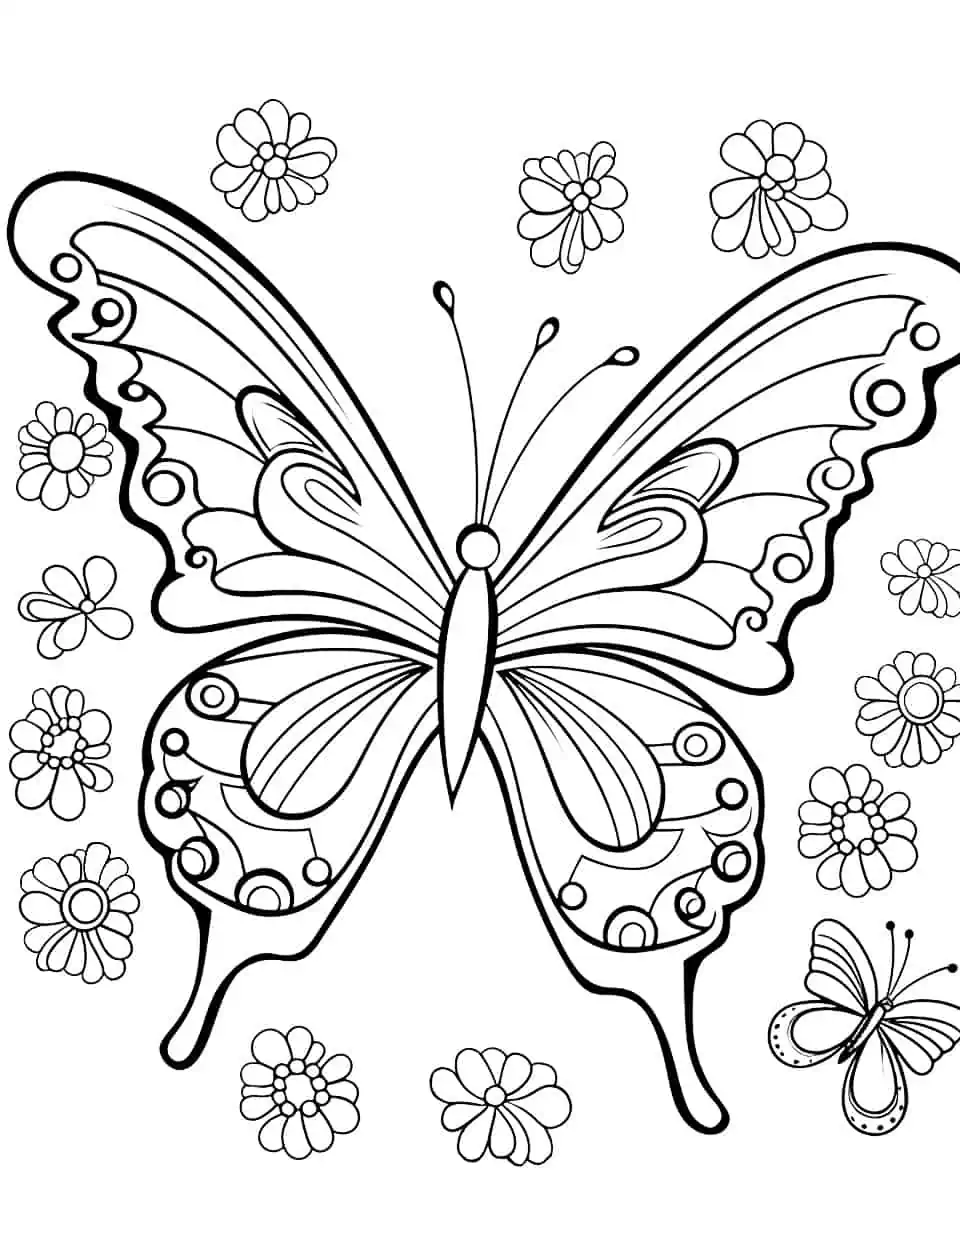 Fluttering Fantasy Butterfly Coloring Page - A whimsical coloring page showcasing butterflies with unique and imaginative patterns.